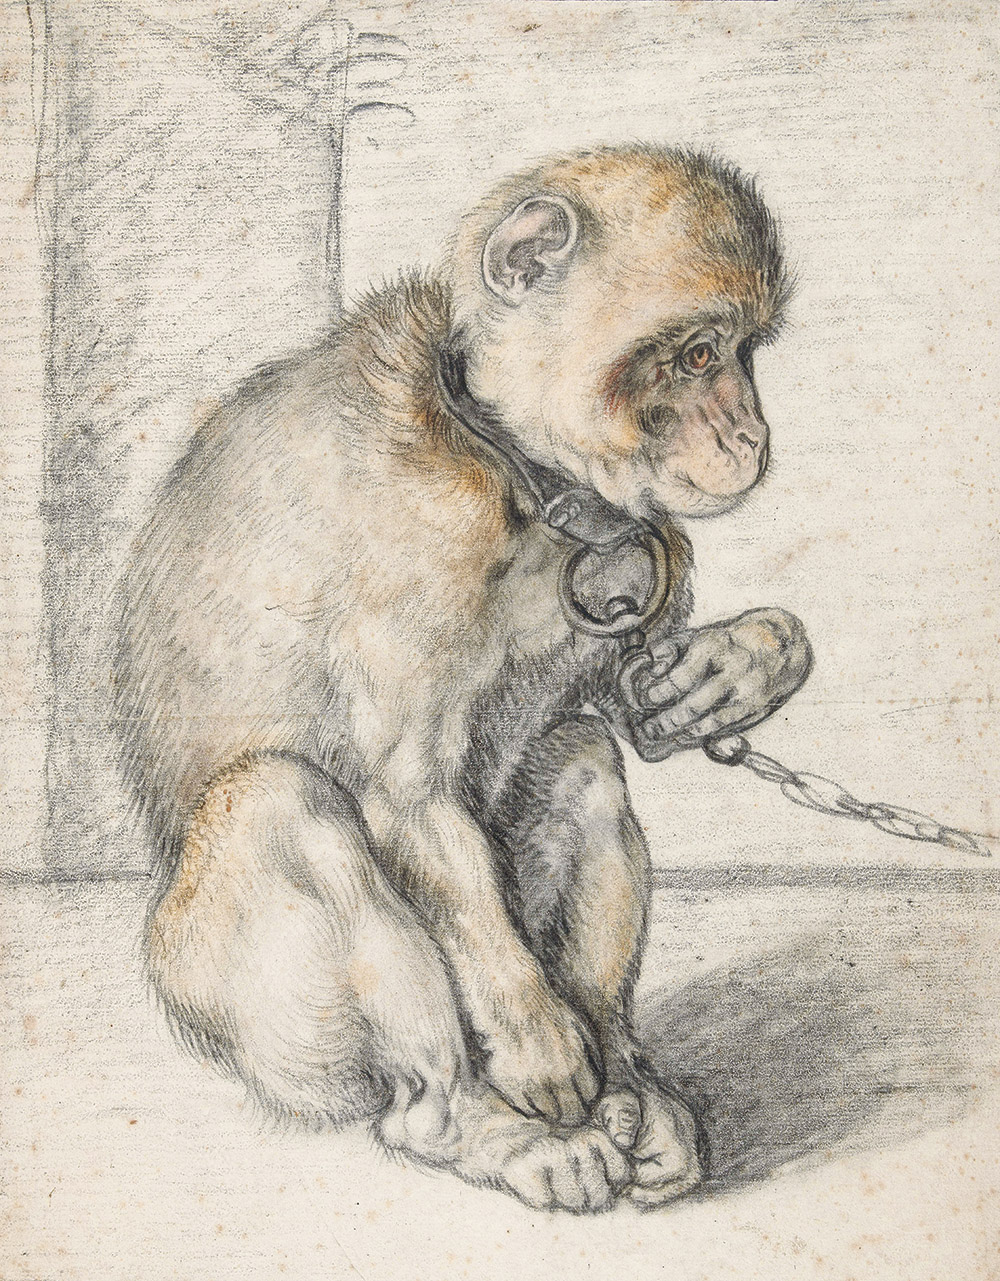 A Seated Monkey on a Chain (detail), by Hendrick Goltzius, c. 1600.